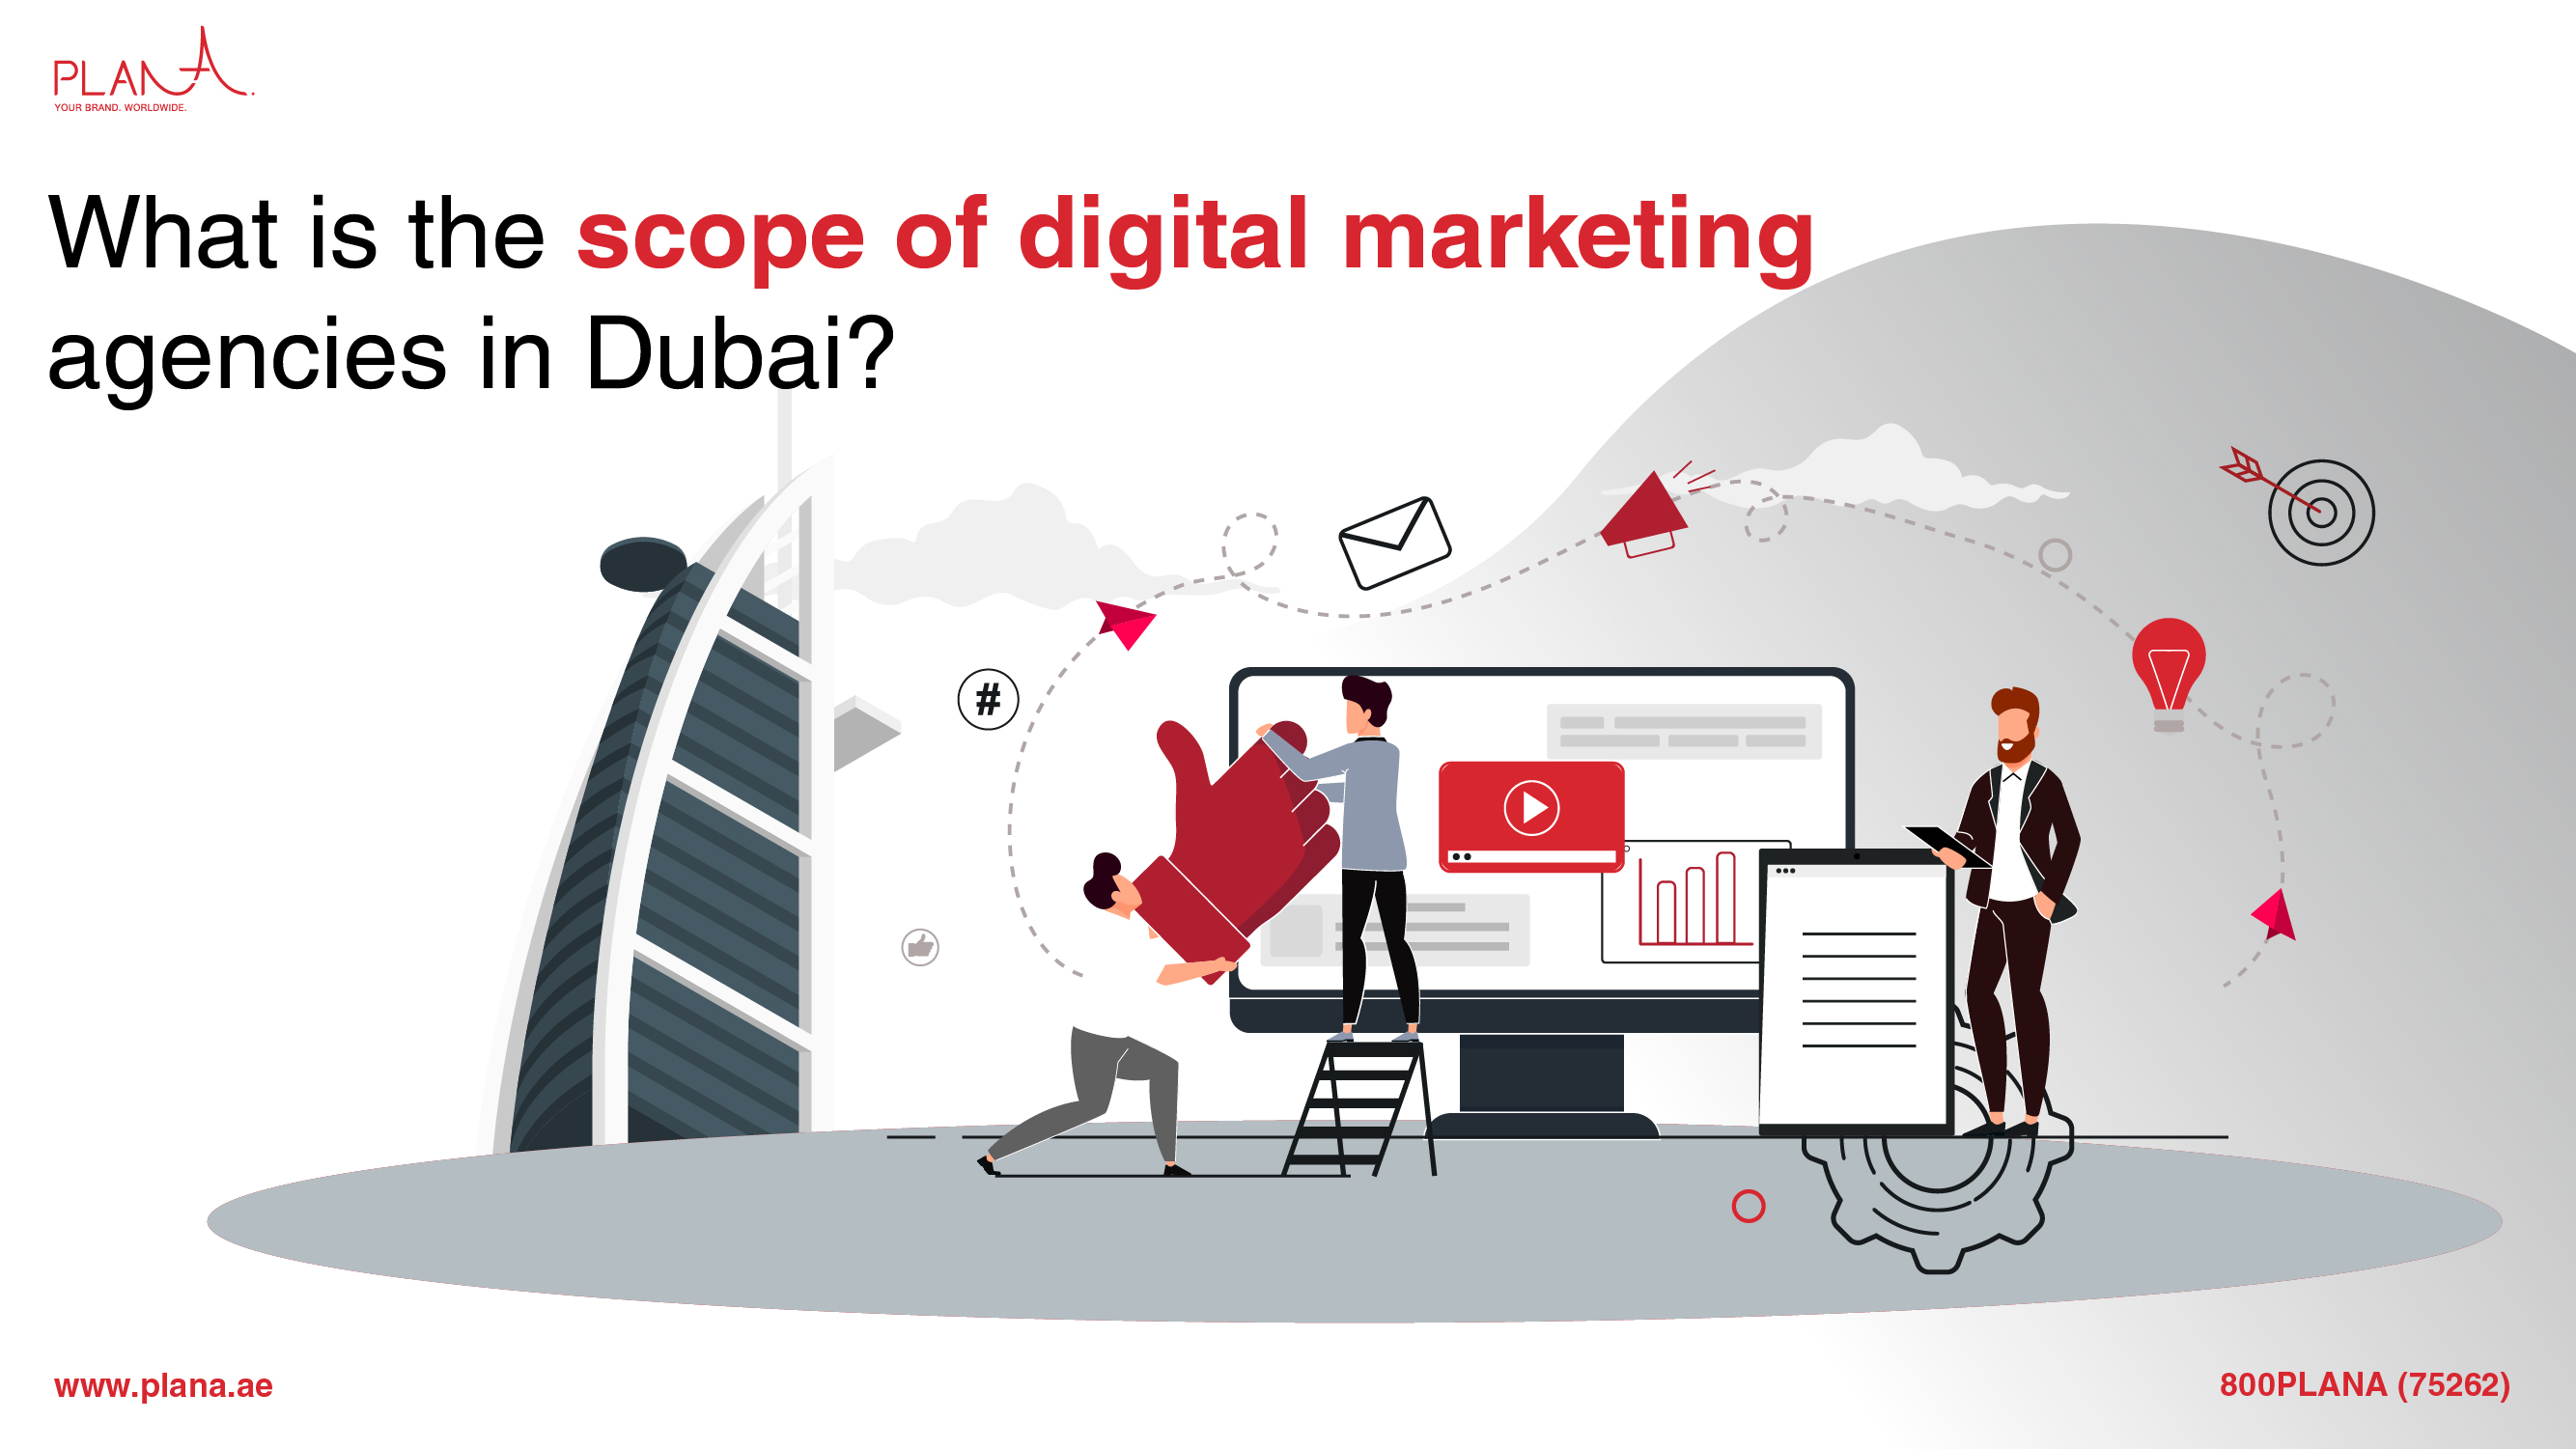 What Is the Scope of Digital Marketing Agencies in Dubai?